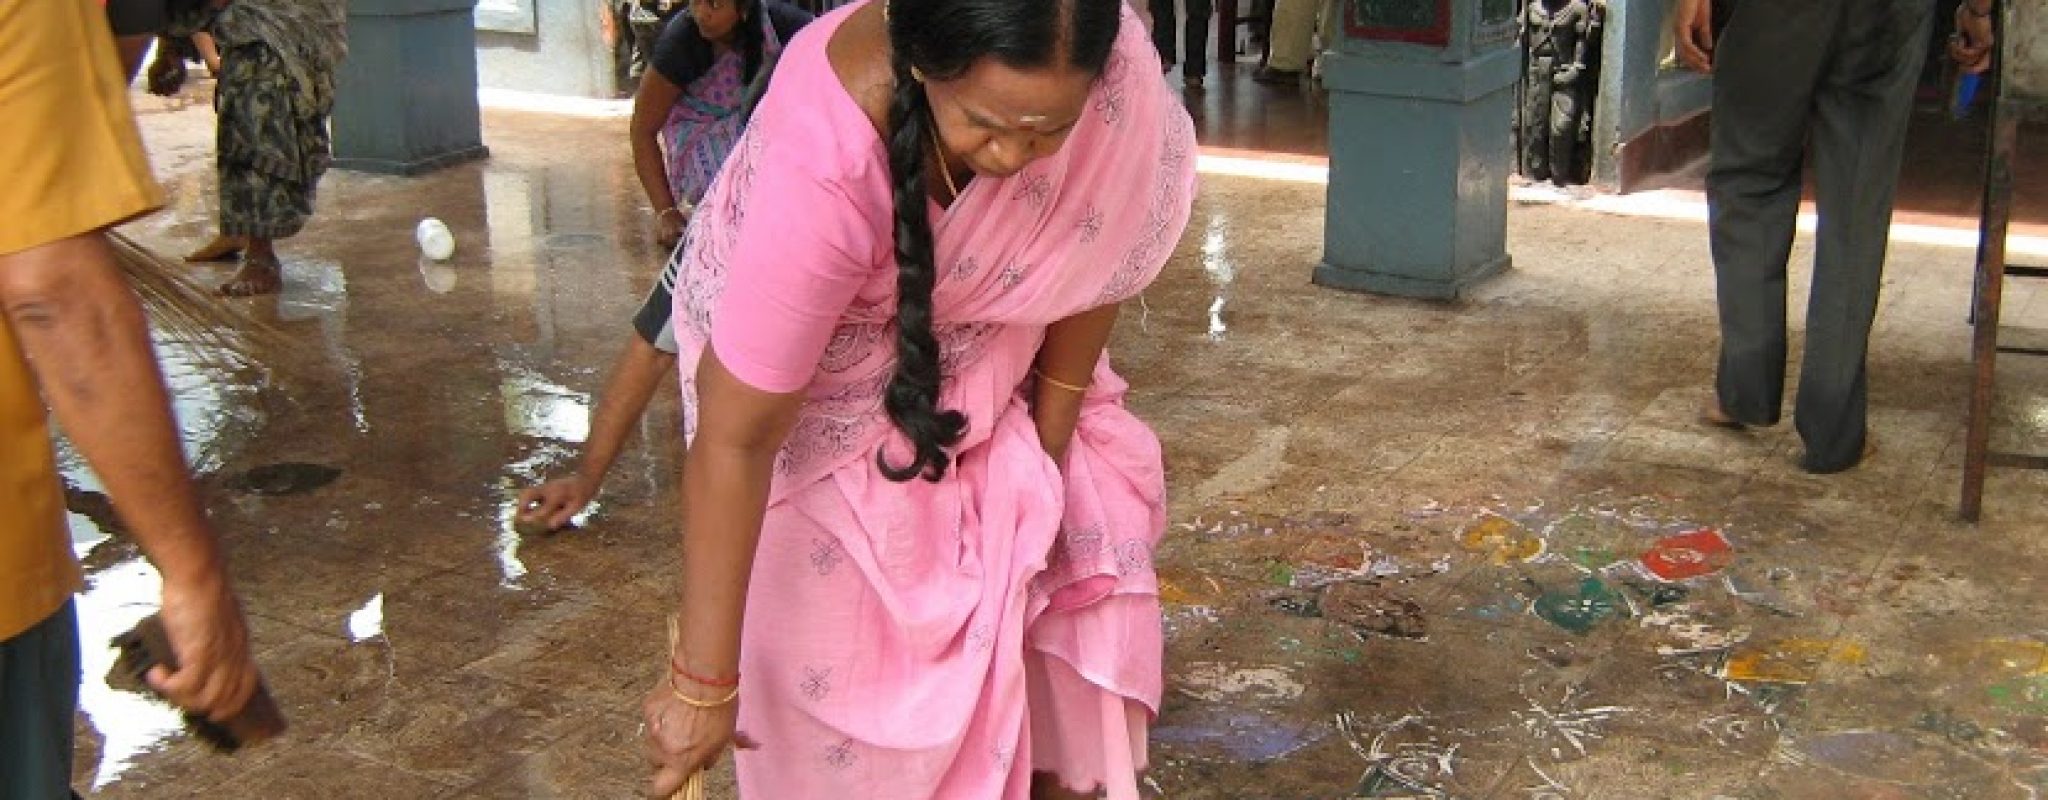 temple_cleaning_IMG_0947